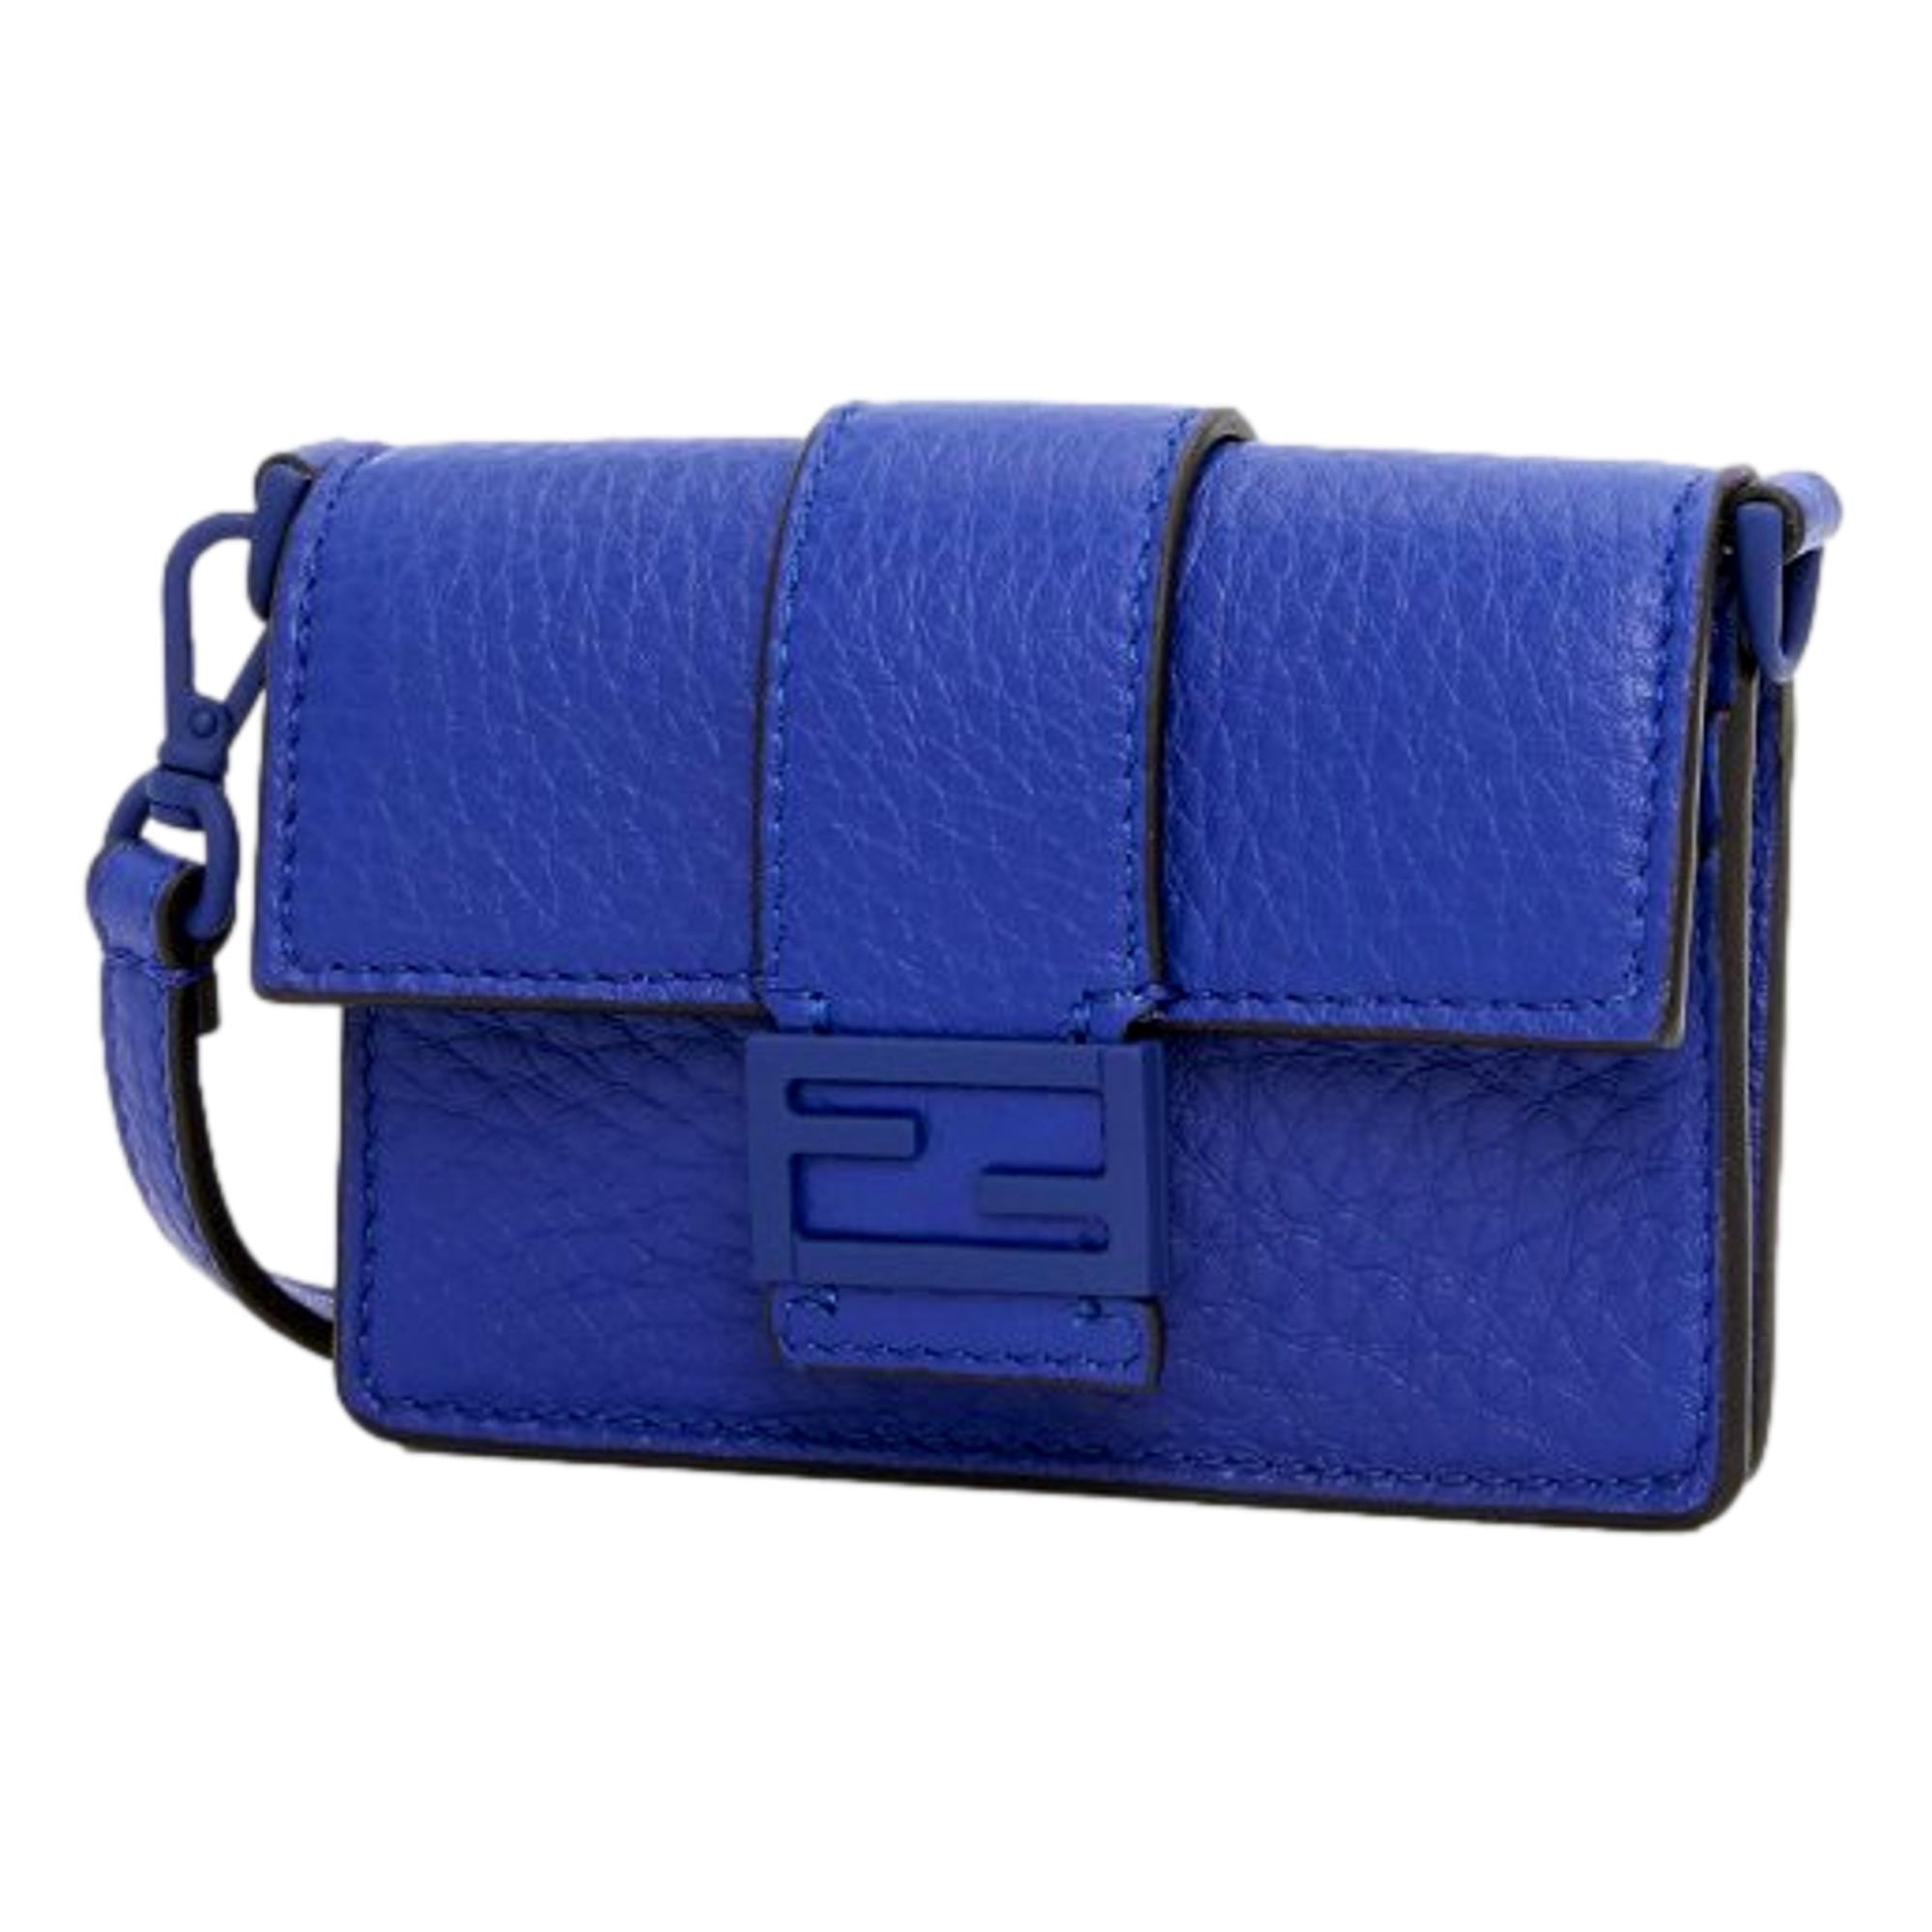 Fendi Micro Baguette Cross Body Neon Blue Leather at_Queen_Bee_of_Beverly_Hills